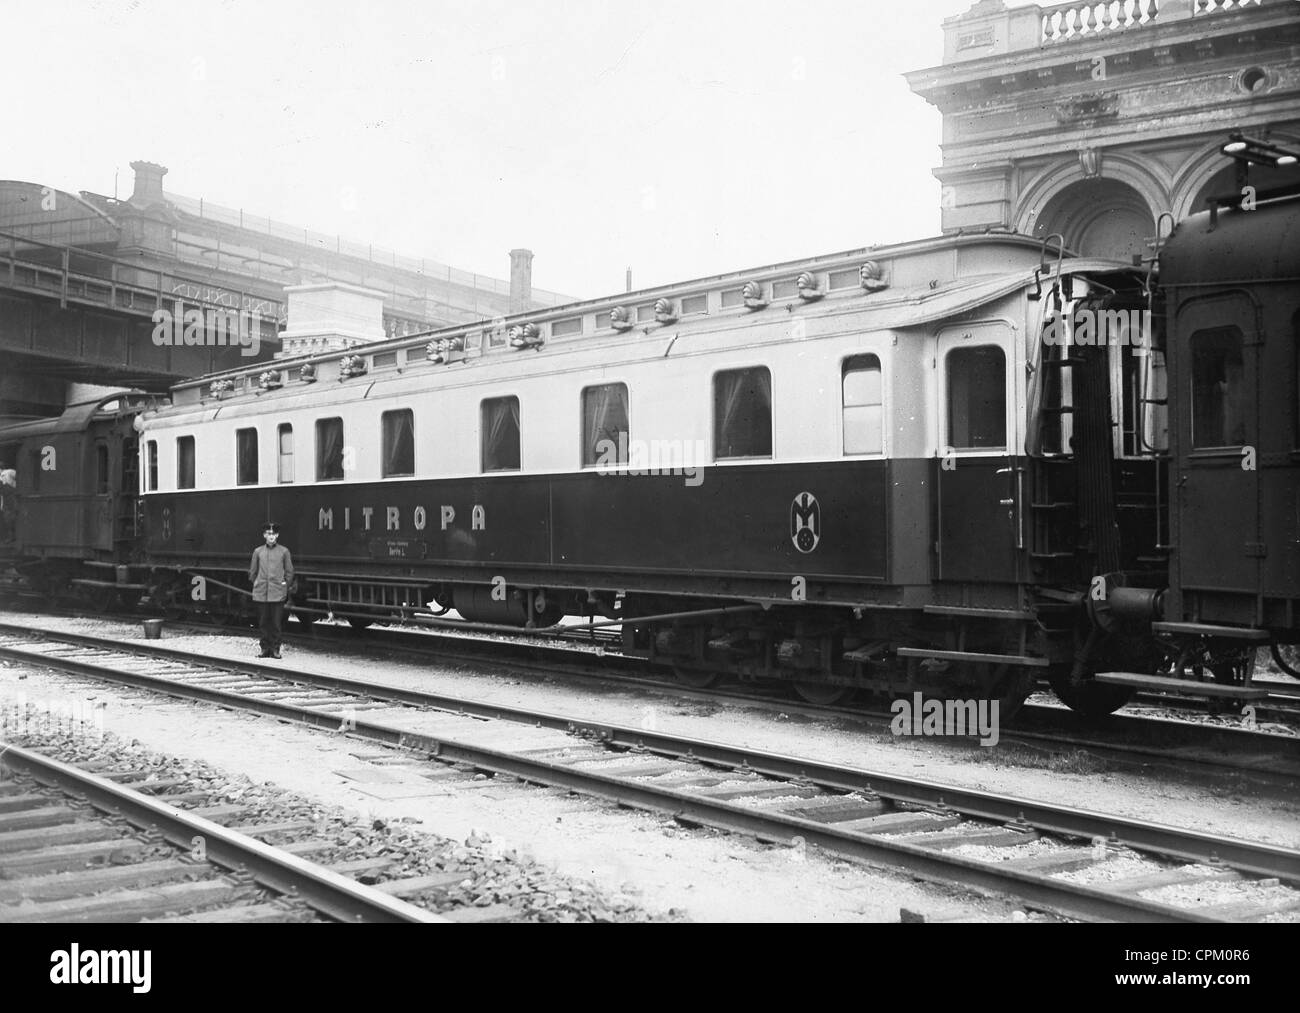 Saloon car of the Imperial Railway, 1928 Stock Photo